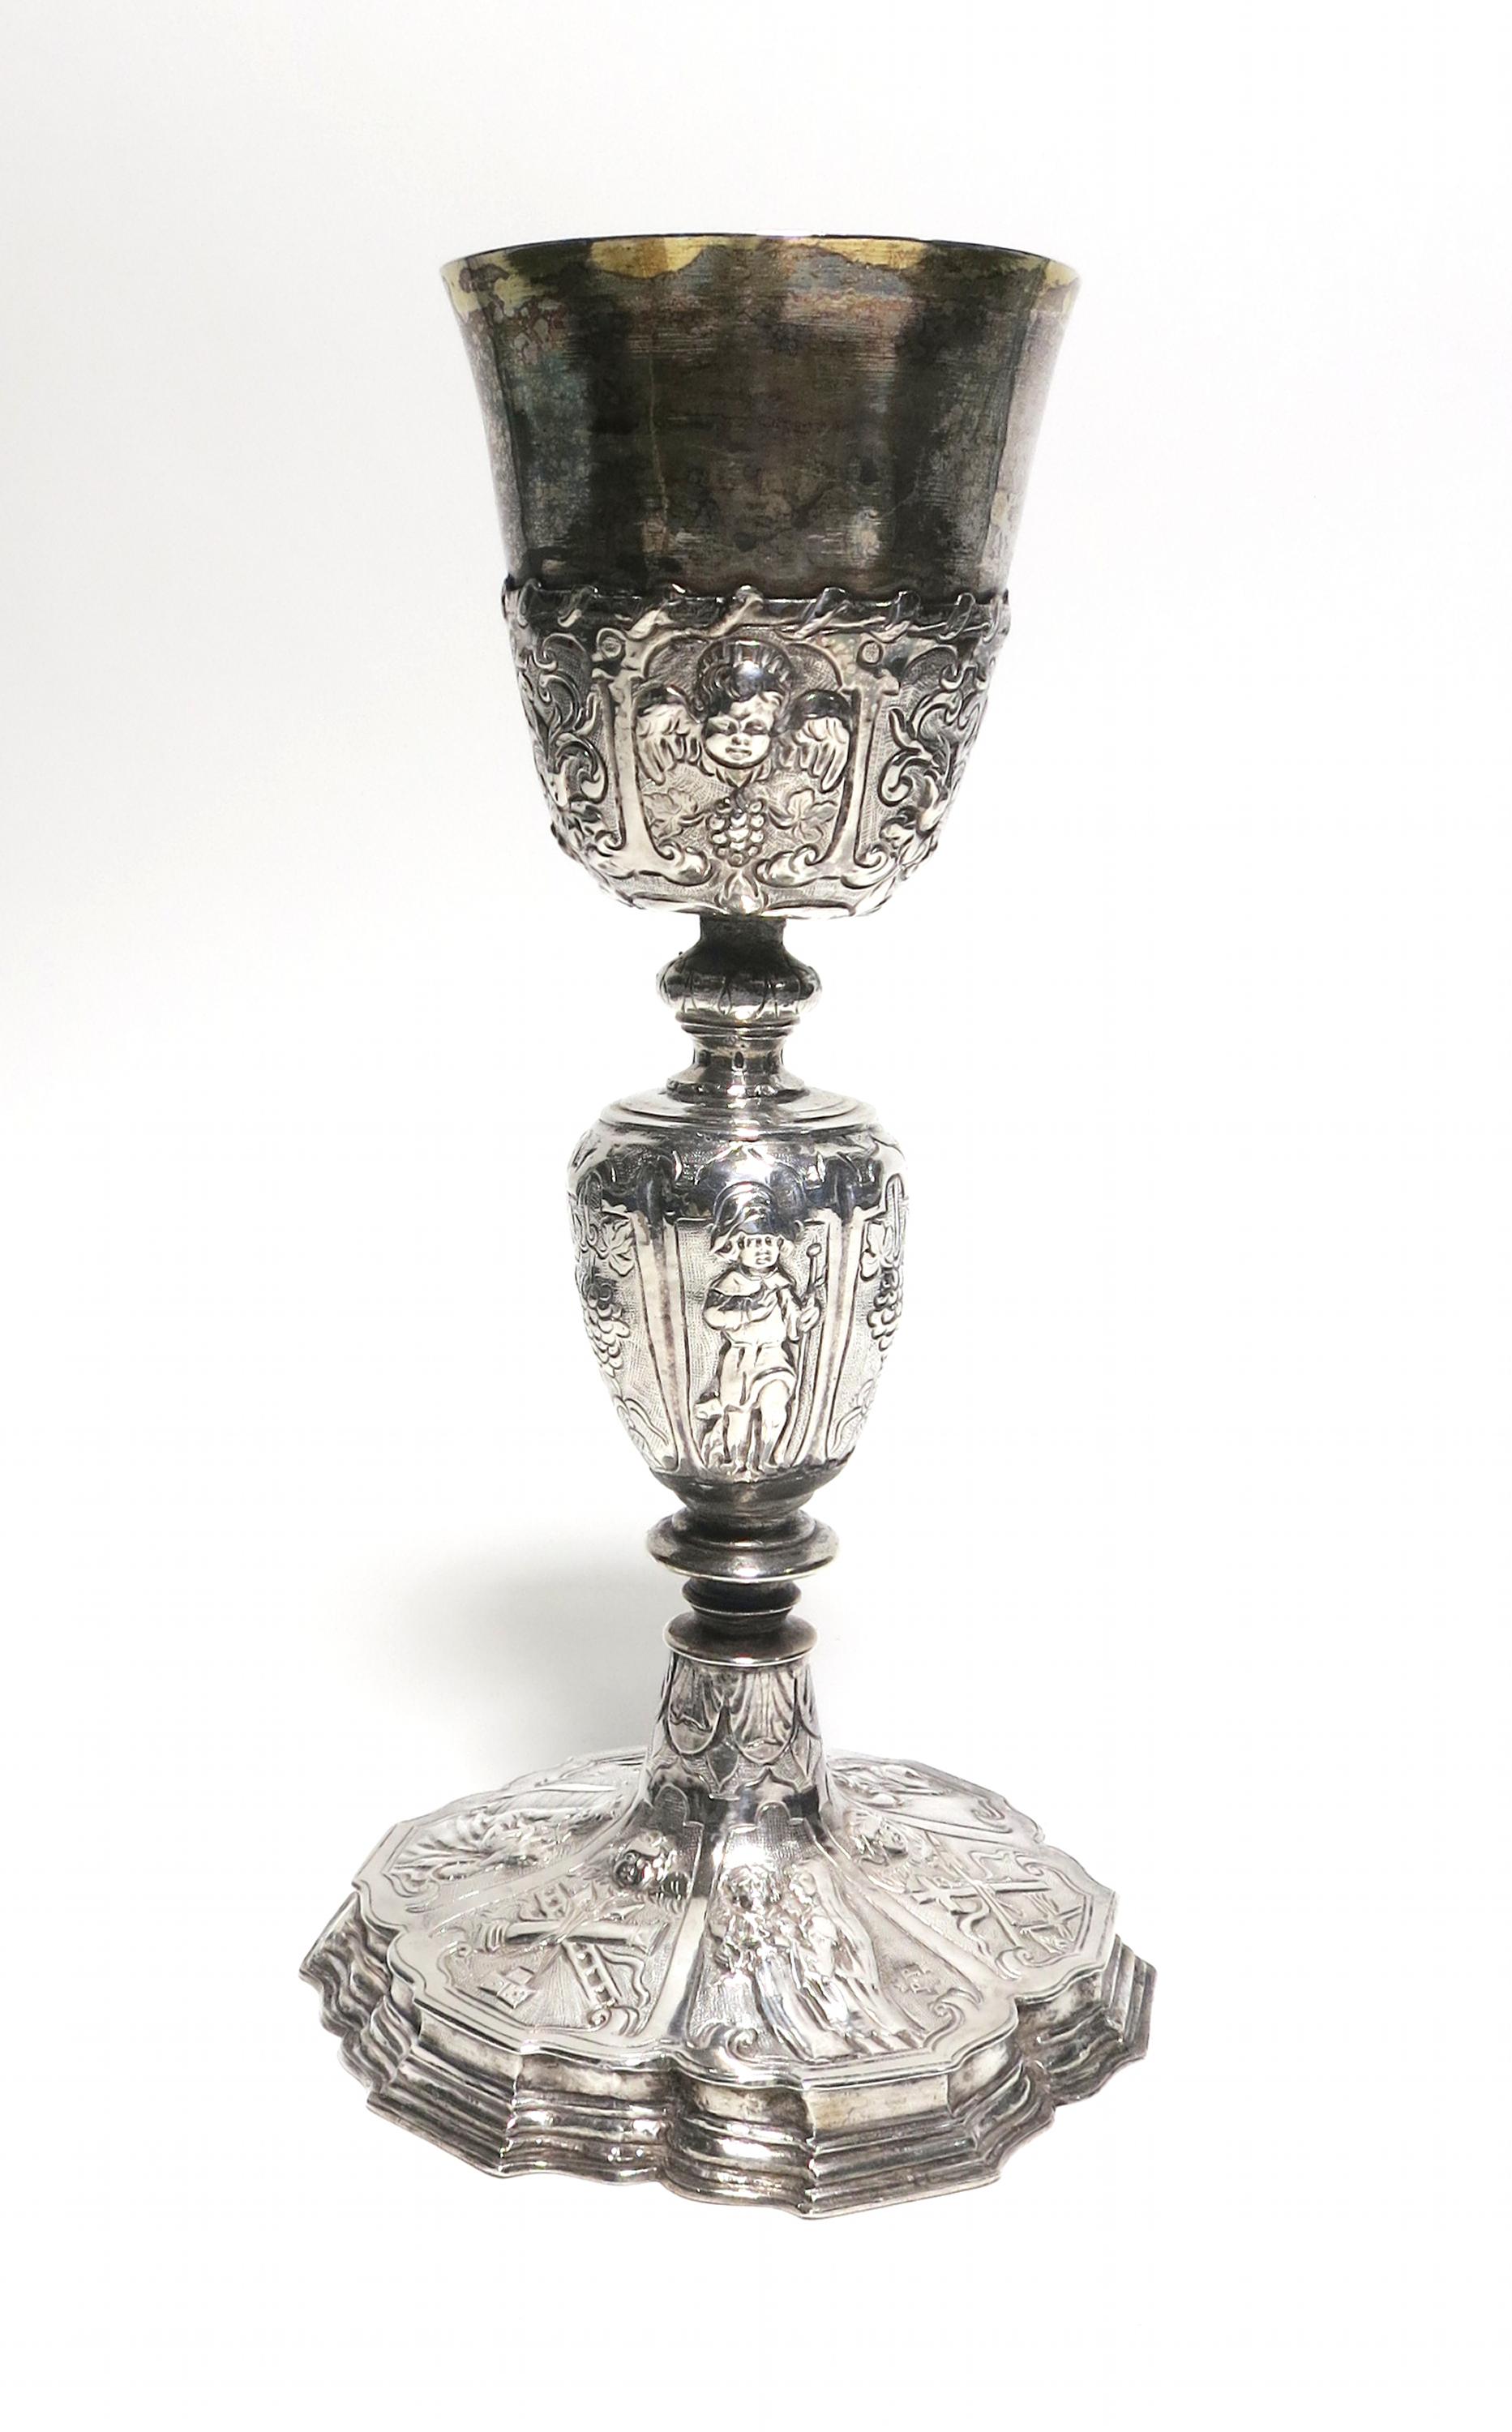 SILVER CHALICE WITH GILT BOWL. Presumably France. Date: 18th century. Technique: Silver, gilt cuppa.